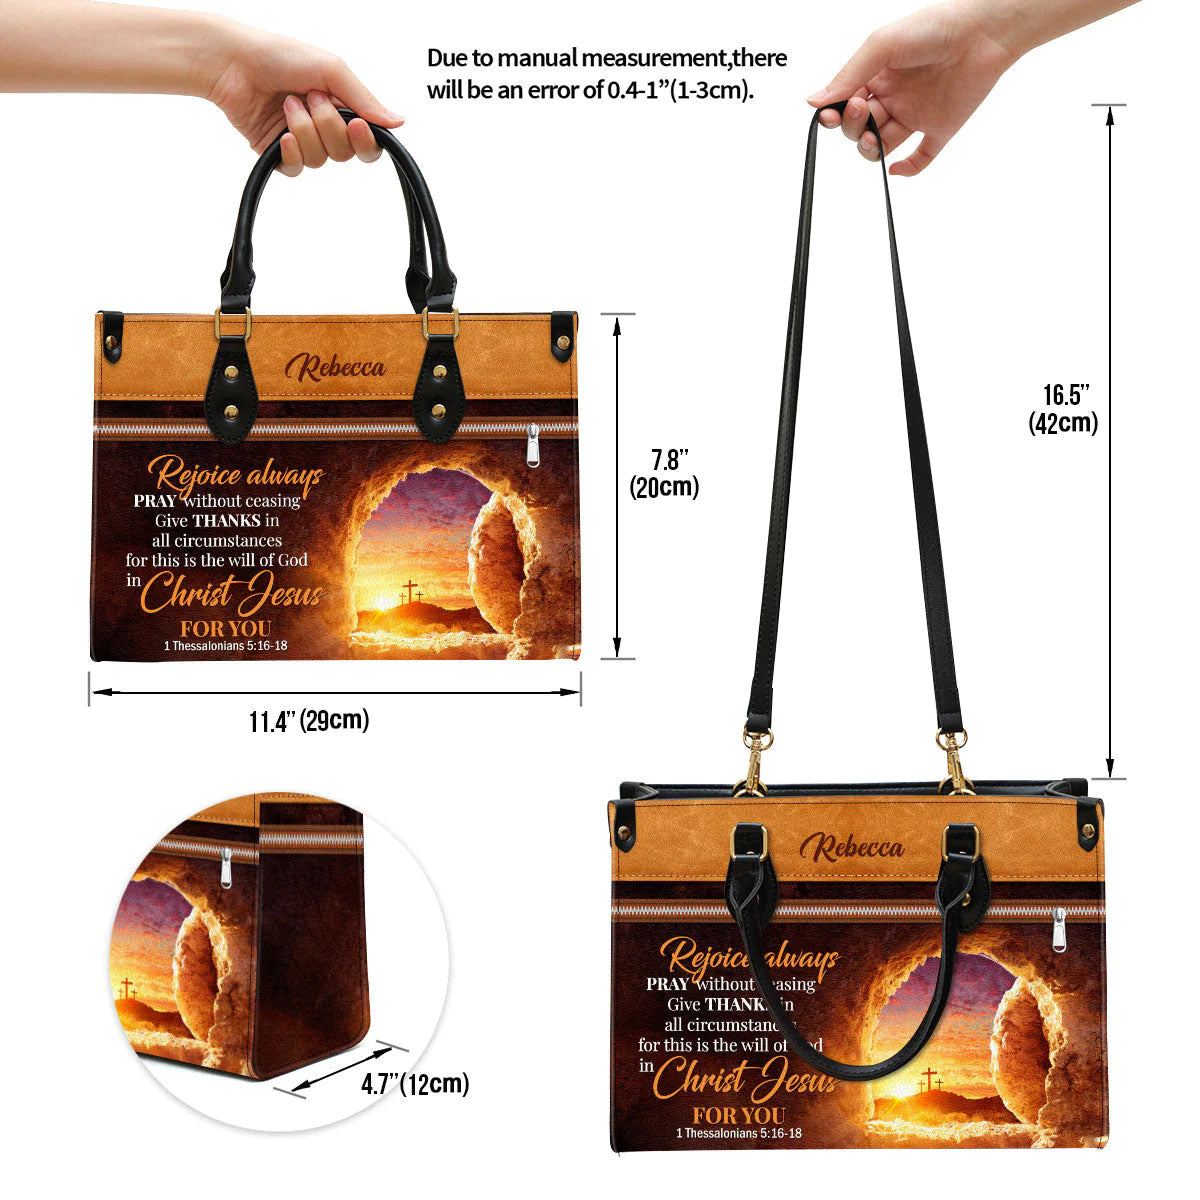 Christianartbag Handbags, Rejoice Always Pray Without Ceasing Leather Bags, Personalized Bags, Gifts for Women, Christmas Gift, CABLTB01300723. - Christian Art Bag